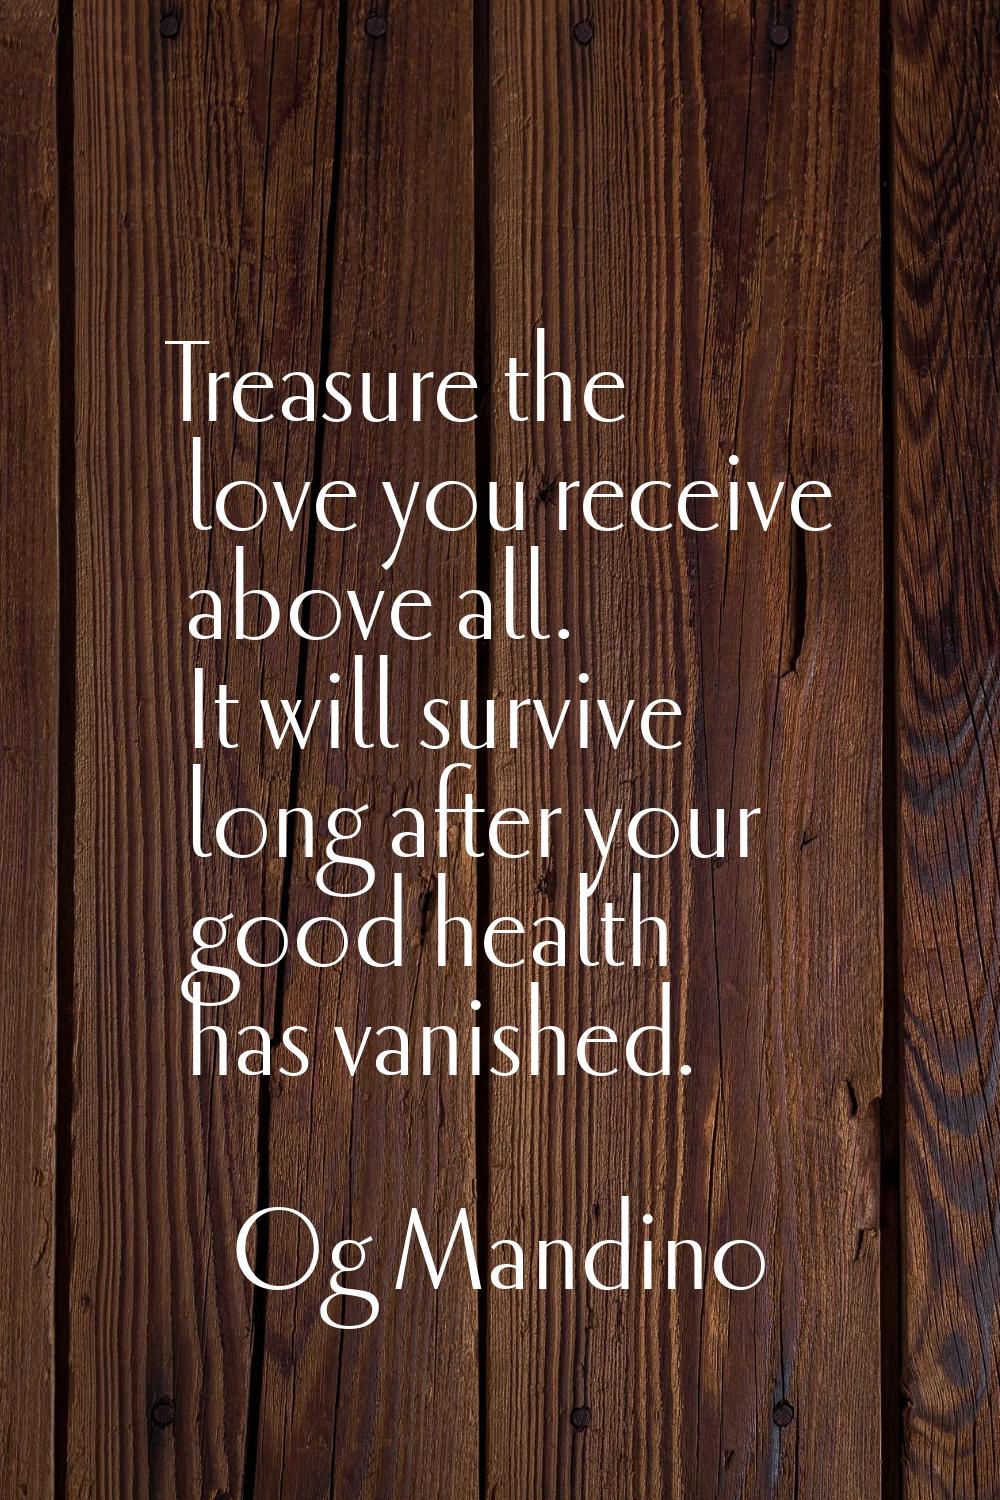 Treasure the love you receive above all. It will survive long after your good health has vanished.